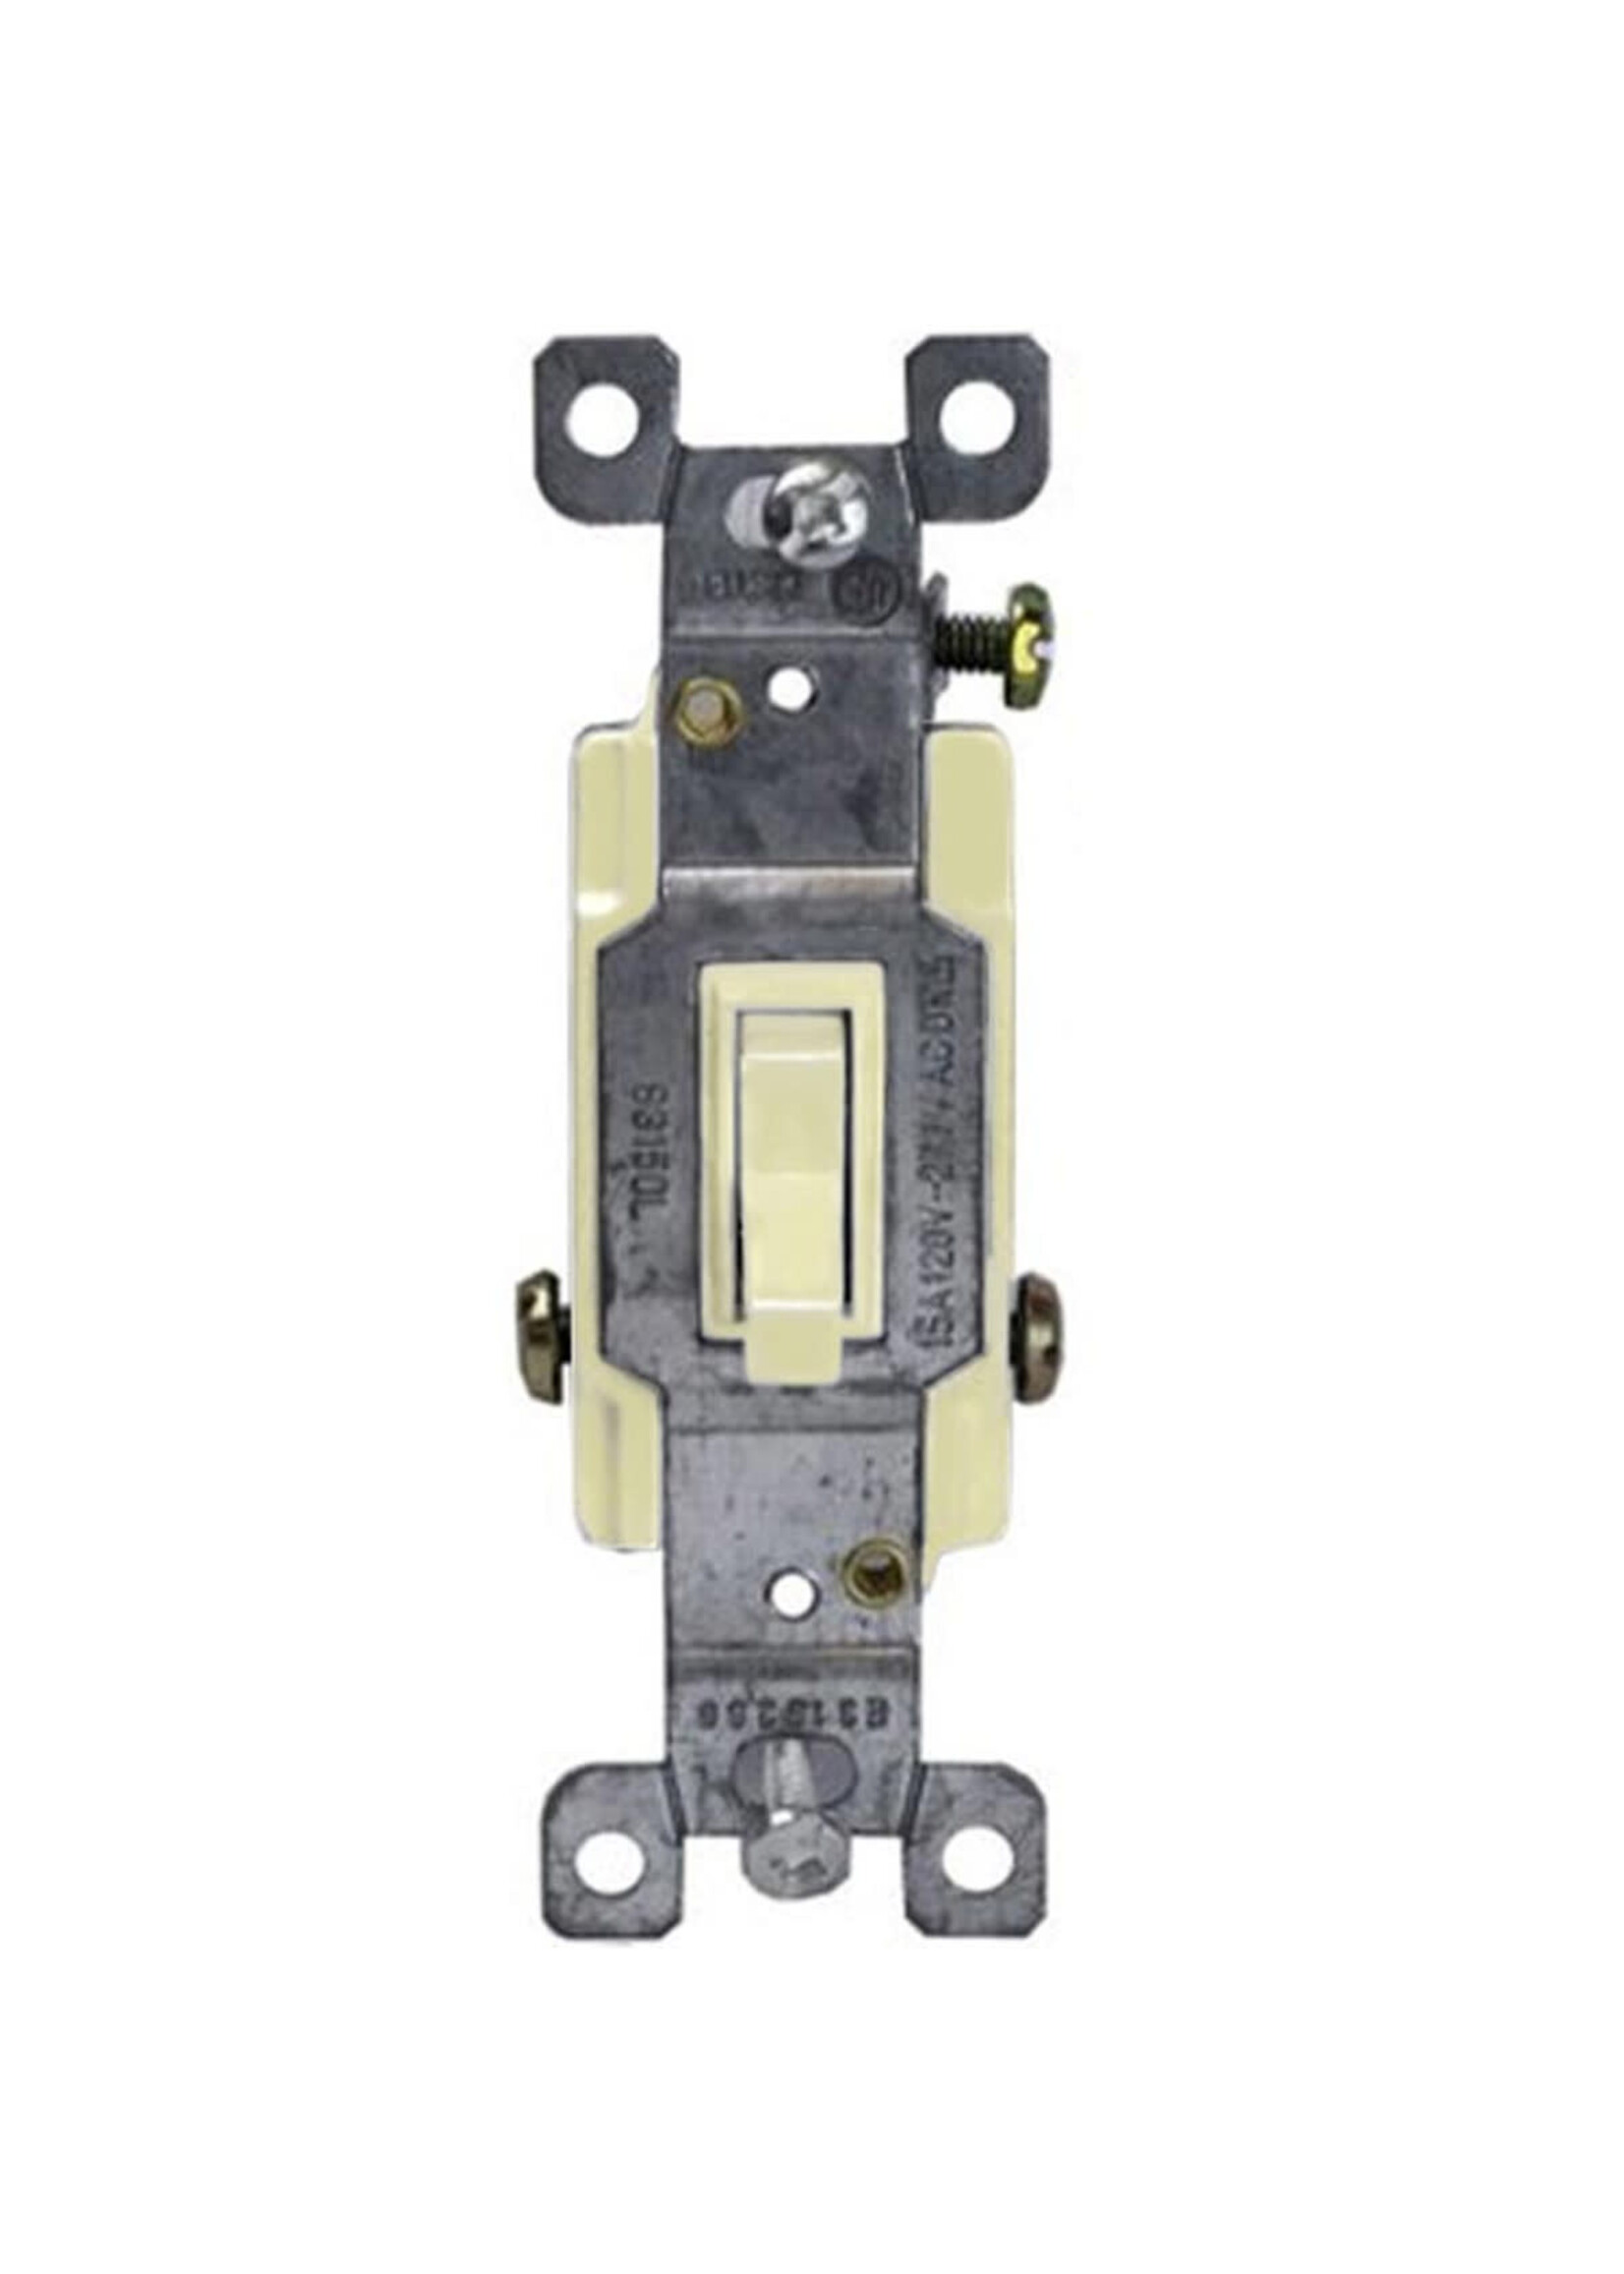 RESIDENTIAL GRADE, TOGGLE SWITCH, 3 WAY, 15A IVORY (83150-I)